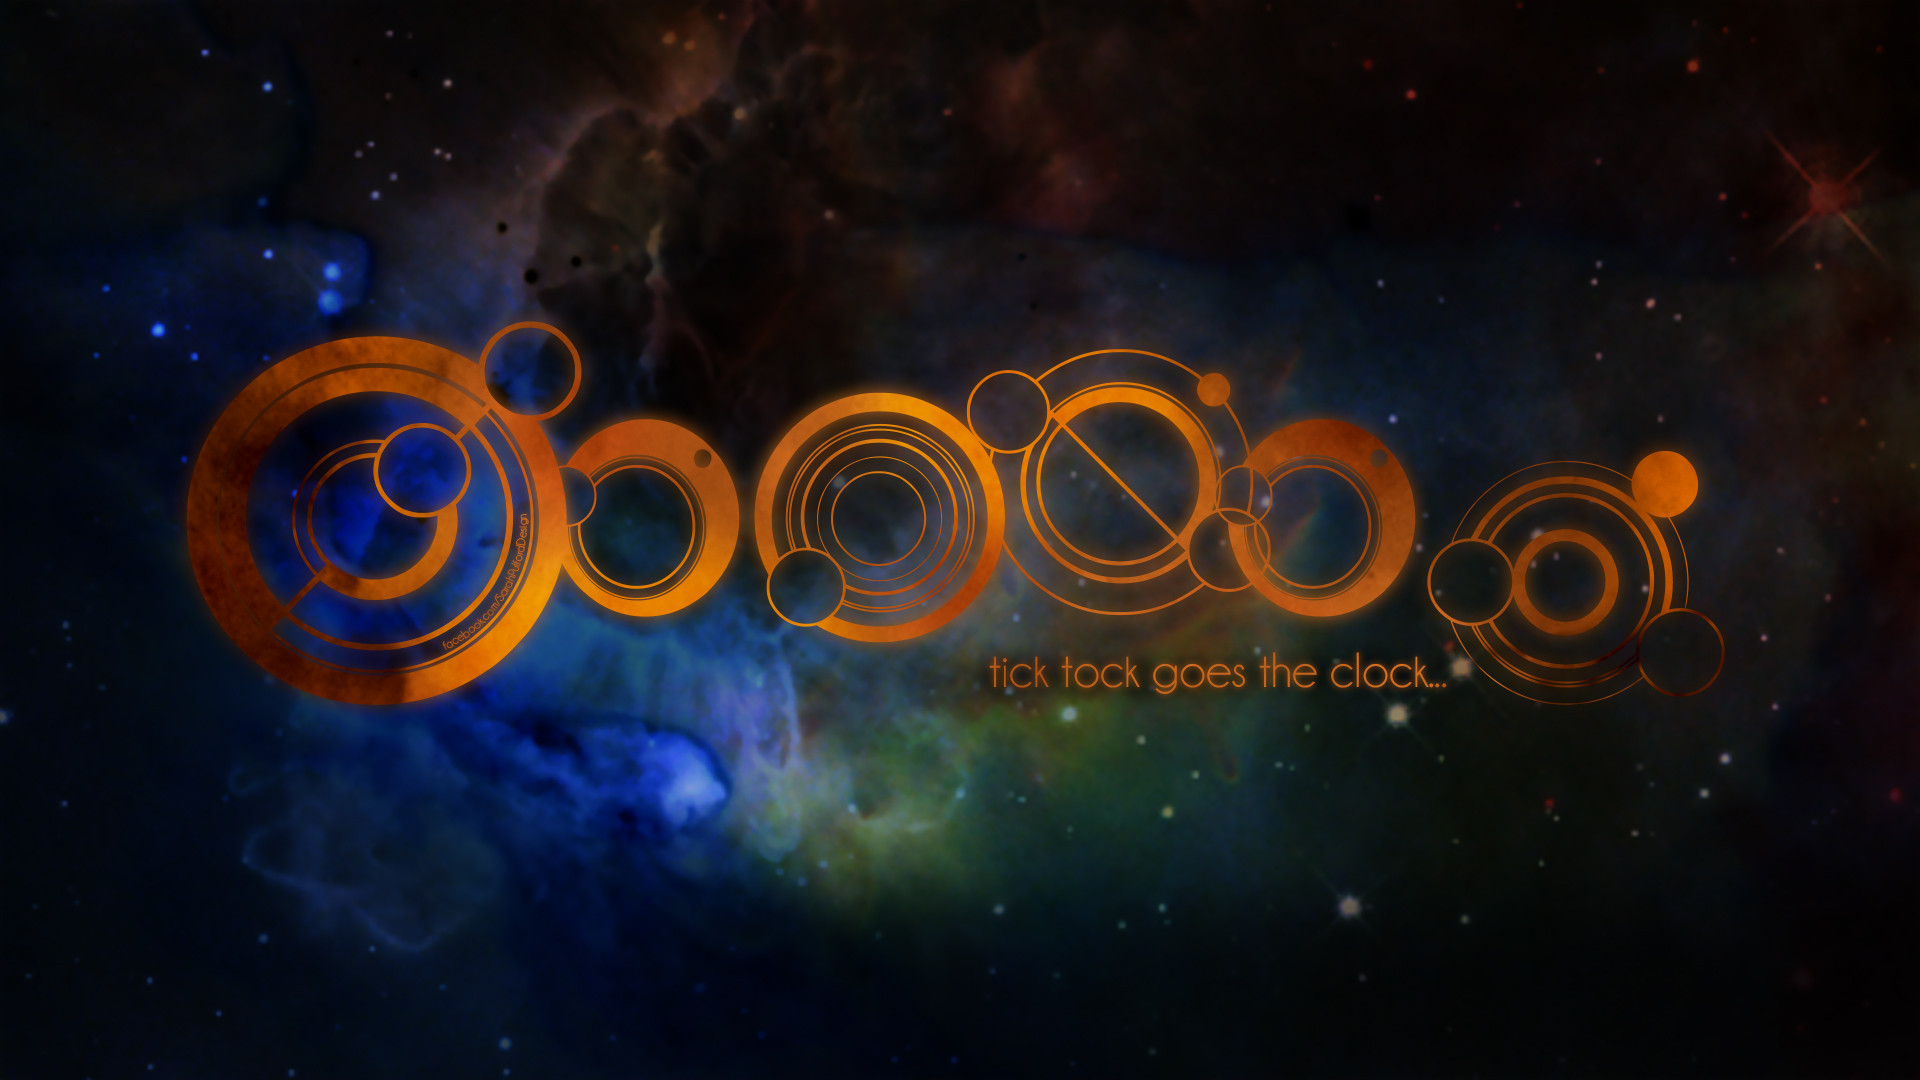 Doctor Who HD Wallpapers for desktop download 1920x1080